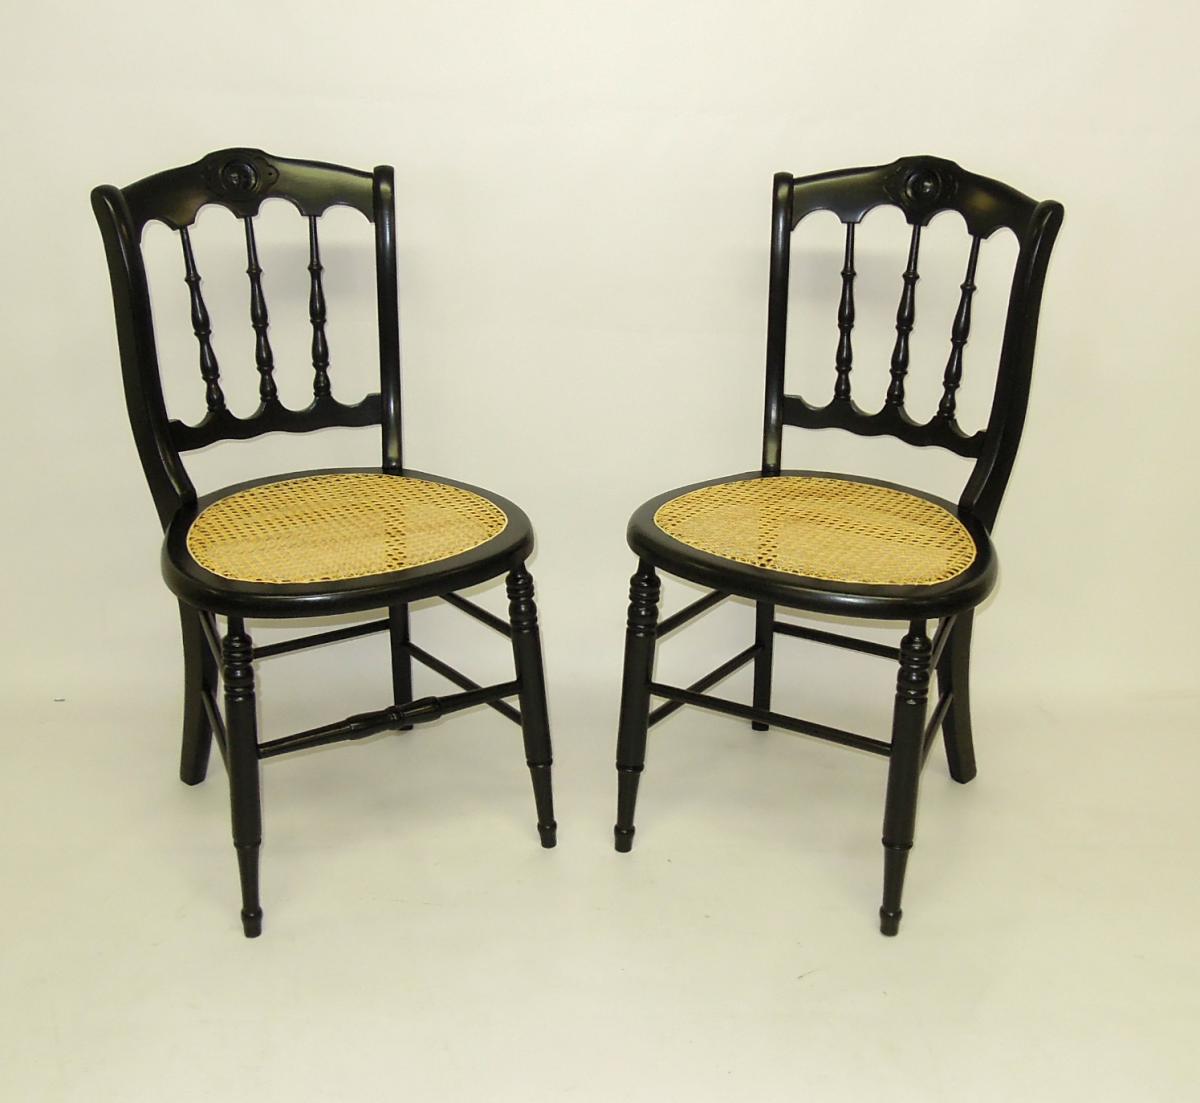 Refinished and re-caned antique dining chairs